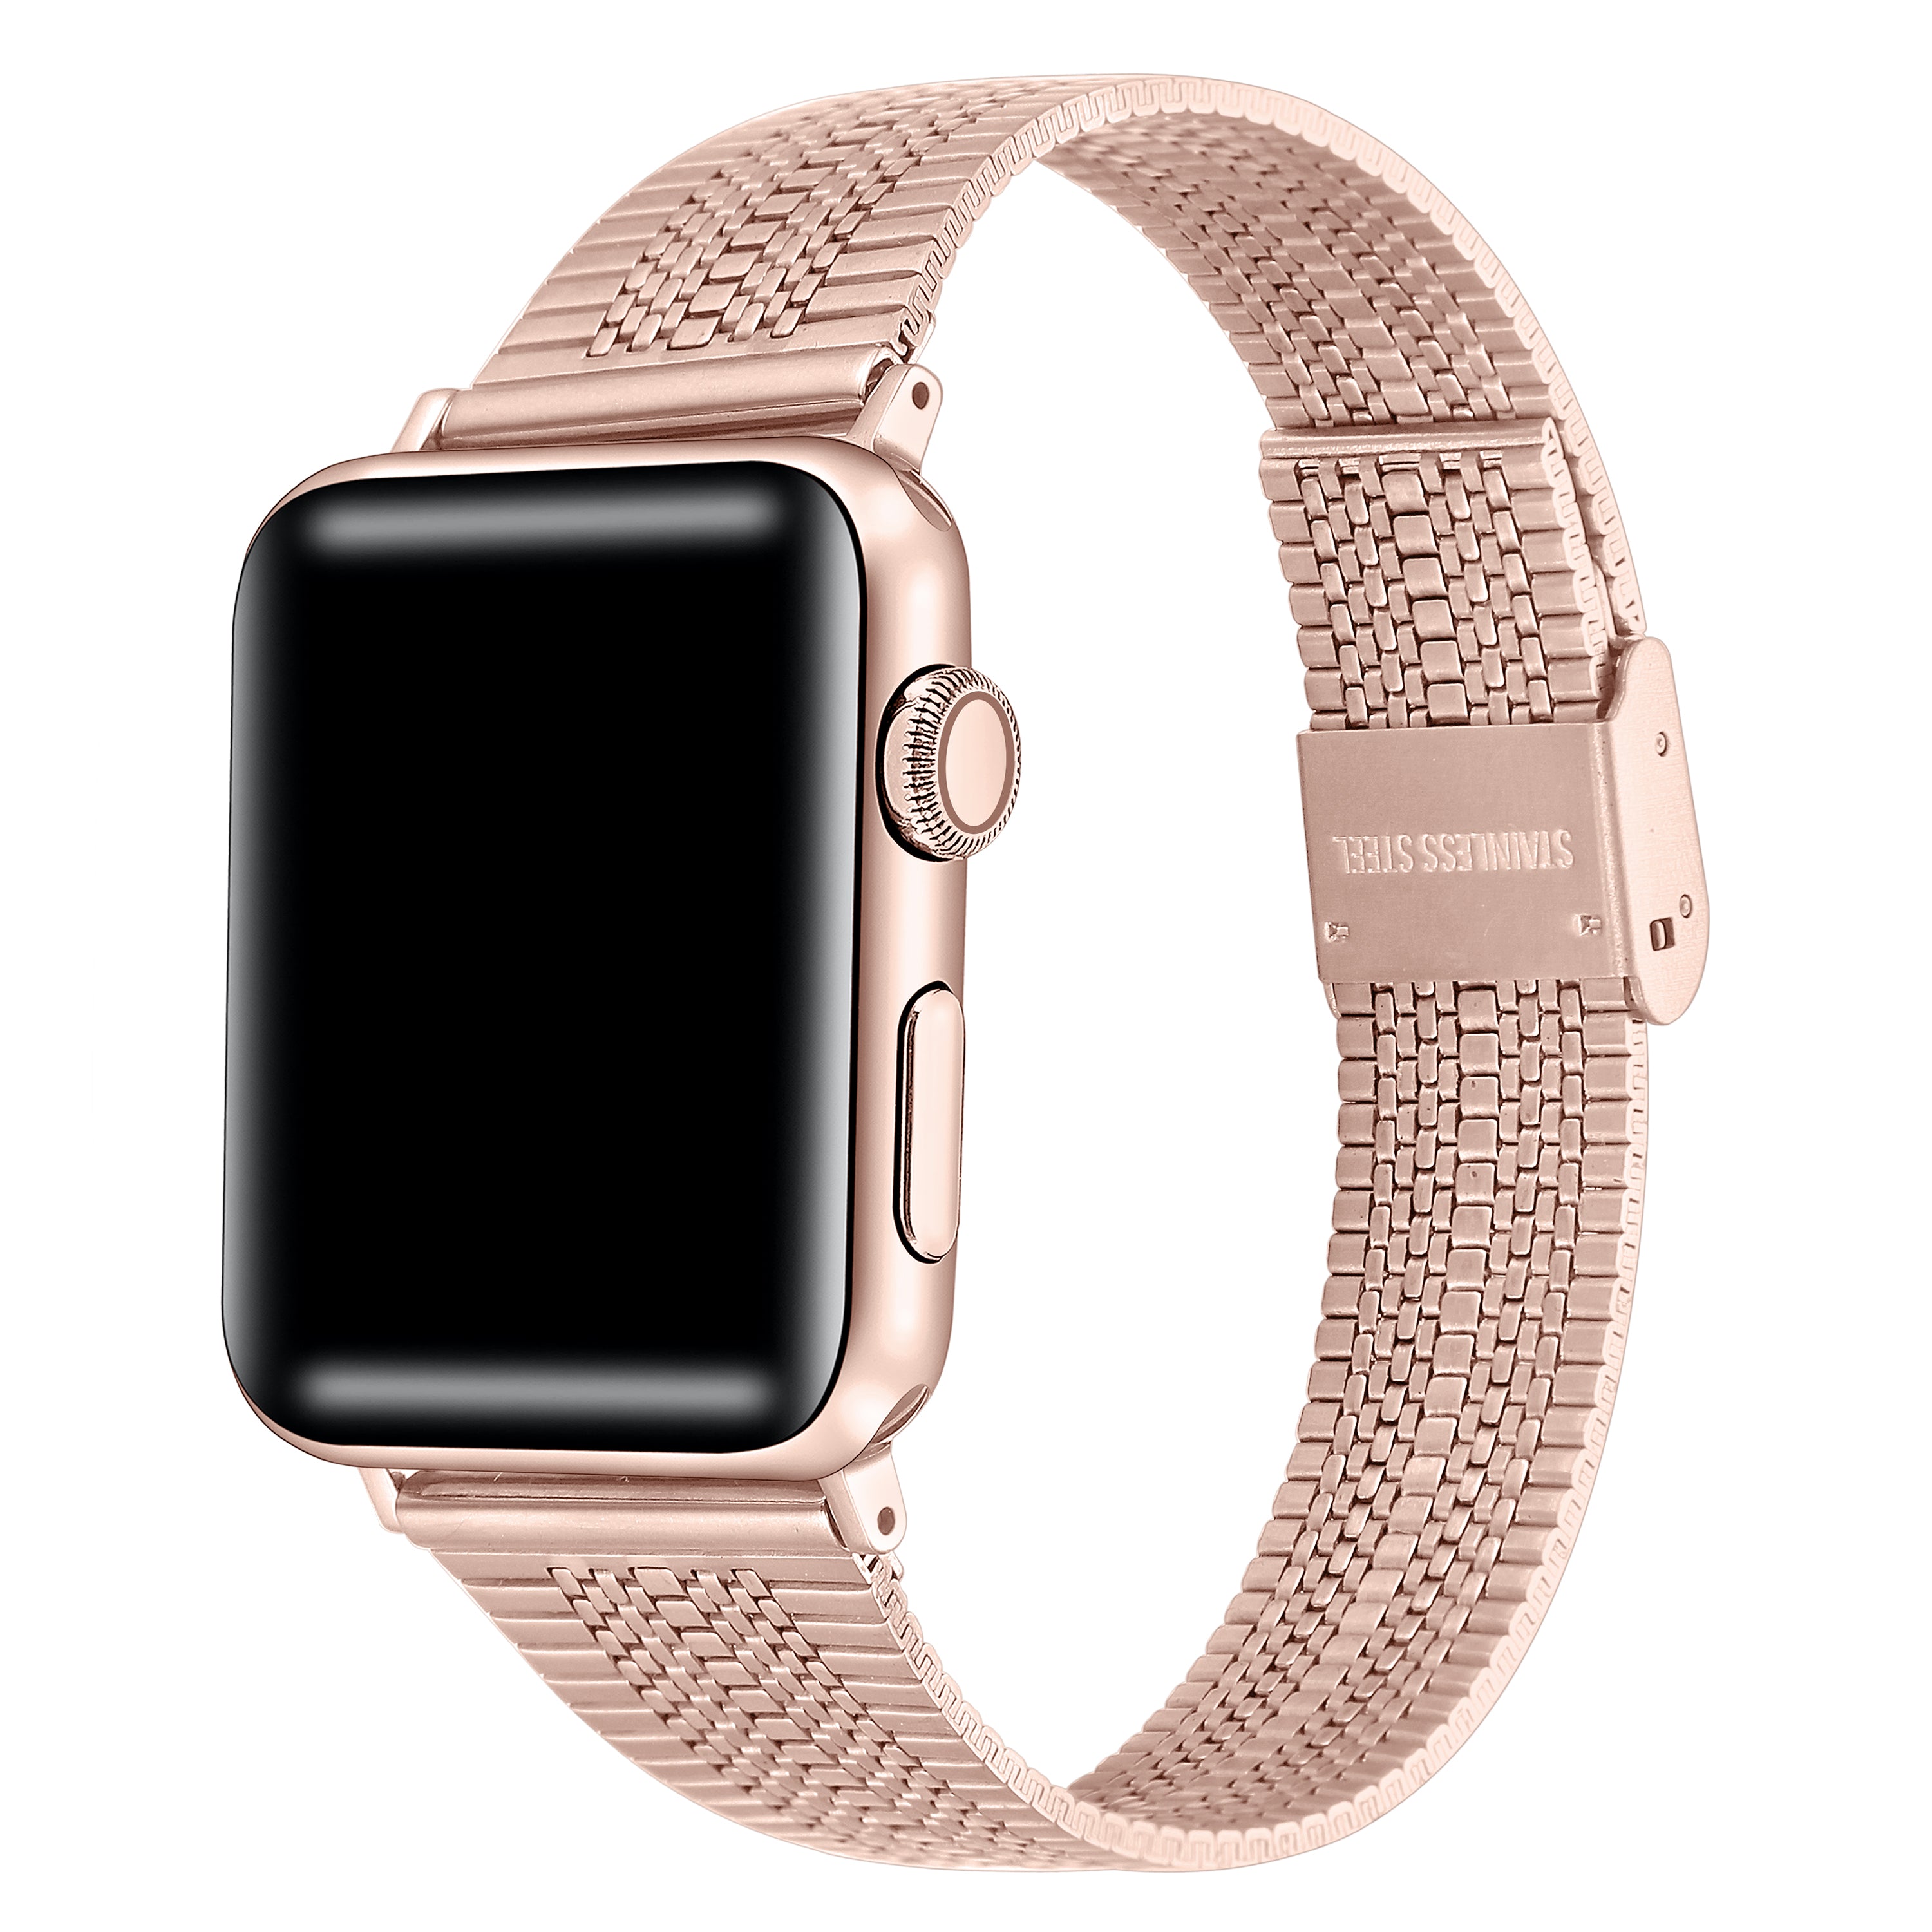 Posh Tech Unisex Eliza Stainless Steel Band for Apple Watch Series 1-8 & SE Sizes 42-49mm-Rose Gold - image 1 of 4